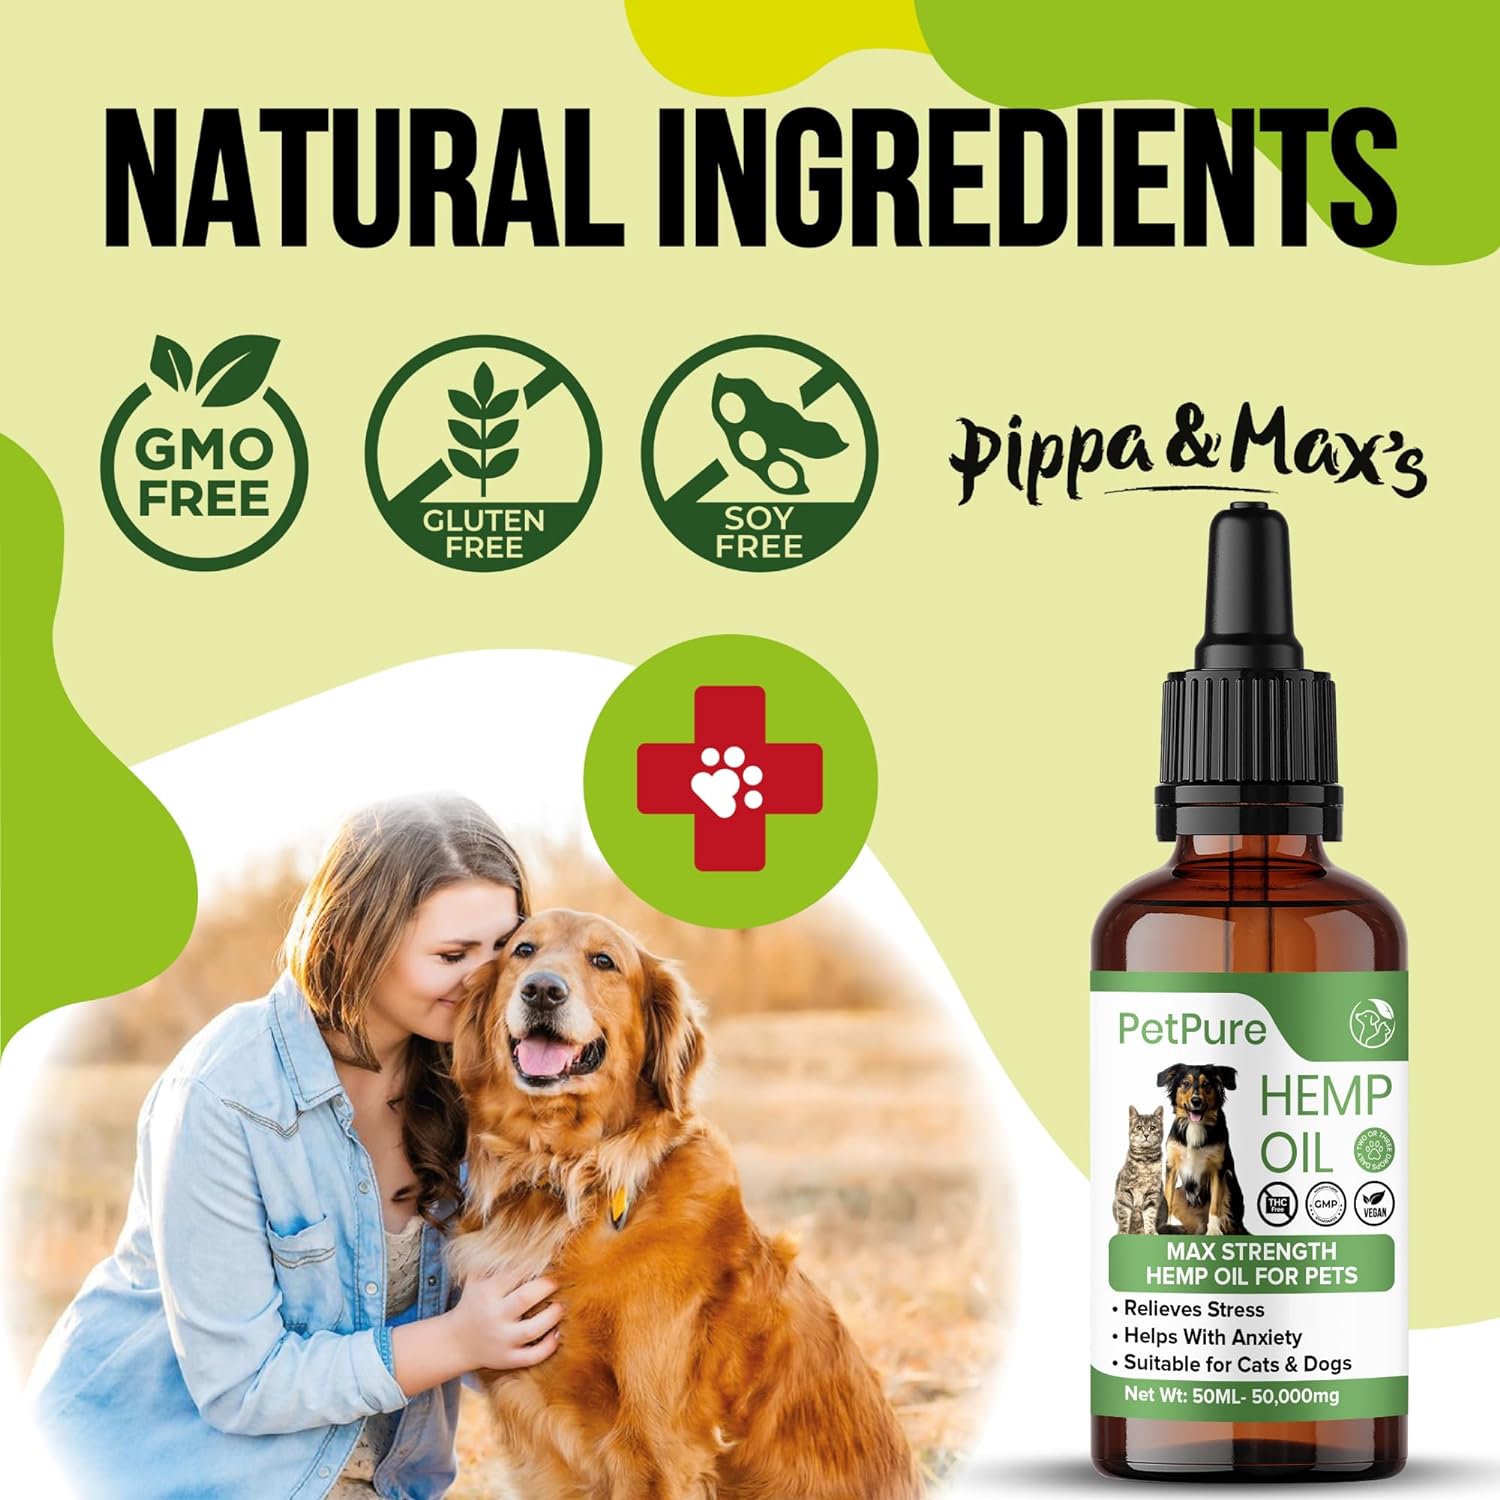 Pippa & Max Hemp Oil for Dogs and Cats & Pets - 50,000MG 50ml – Hemp Extract Made in the UK - May Help Stiff Joints & Bones, Reduce Stress and Anxiety